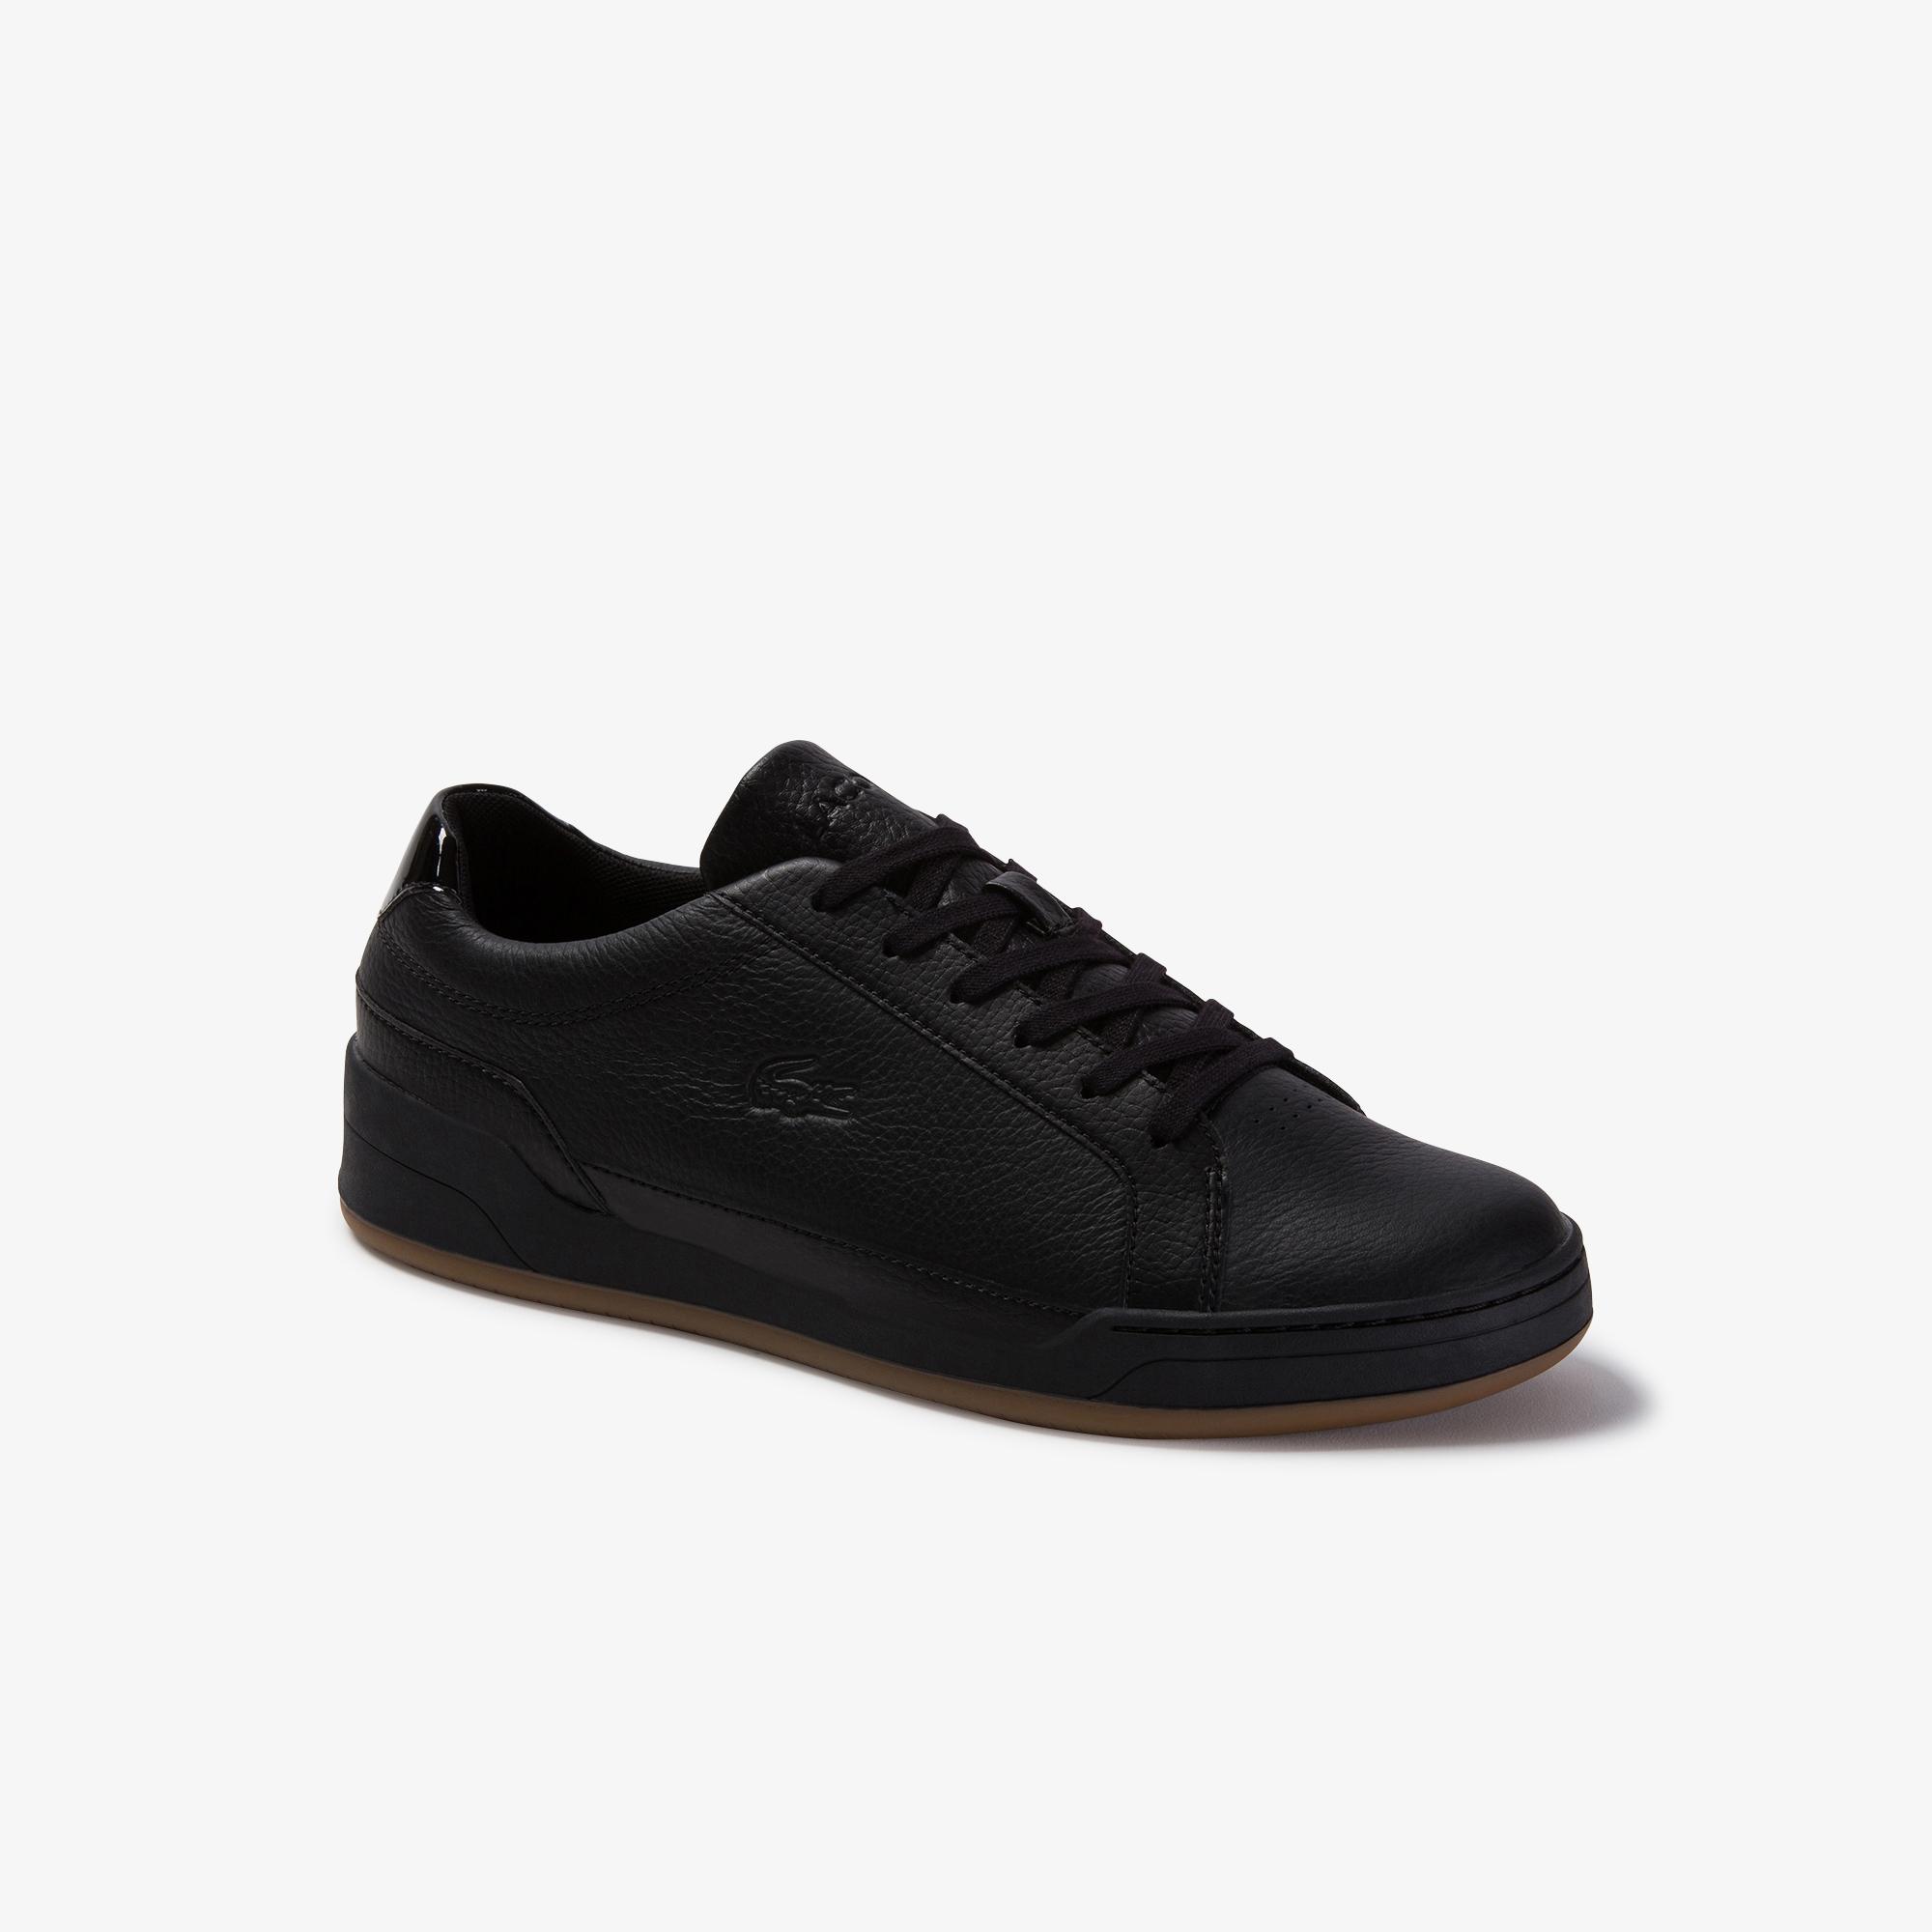 Lacoste Men's Challenge Tumbled Leather Sneakers 739SMA0017-421 | Lacoste